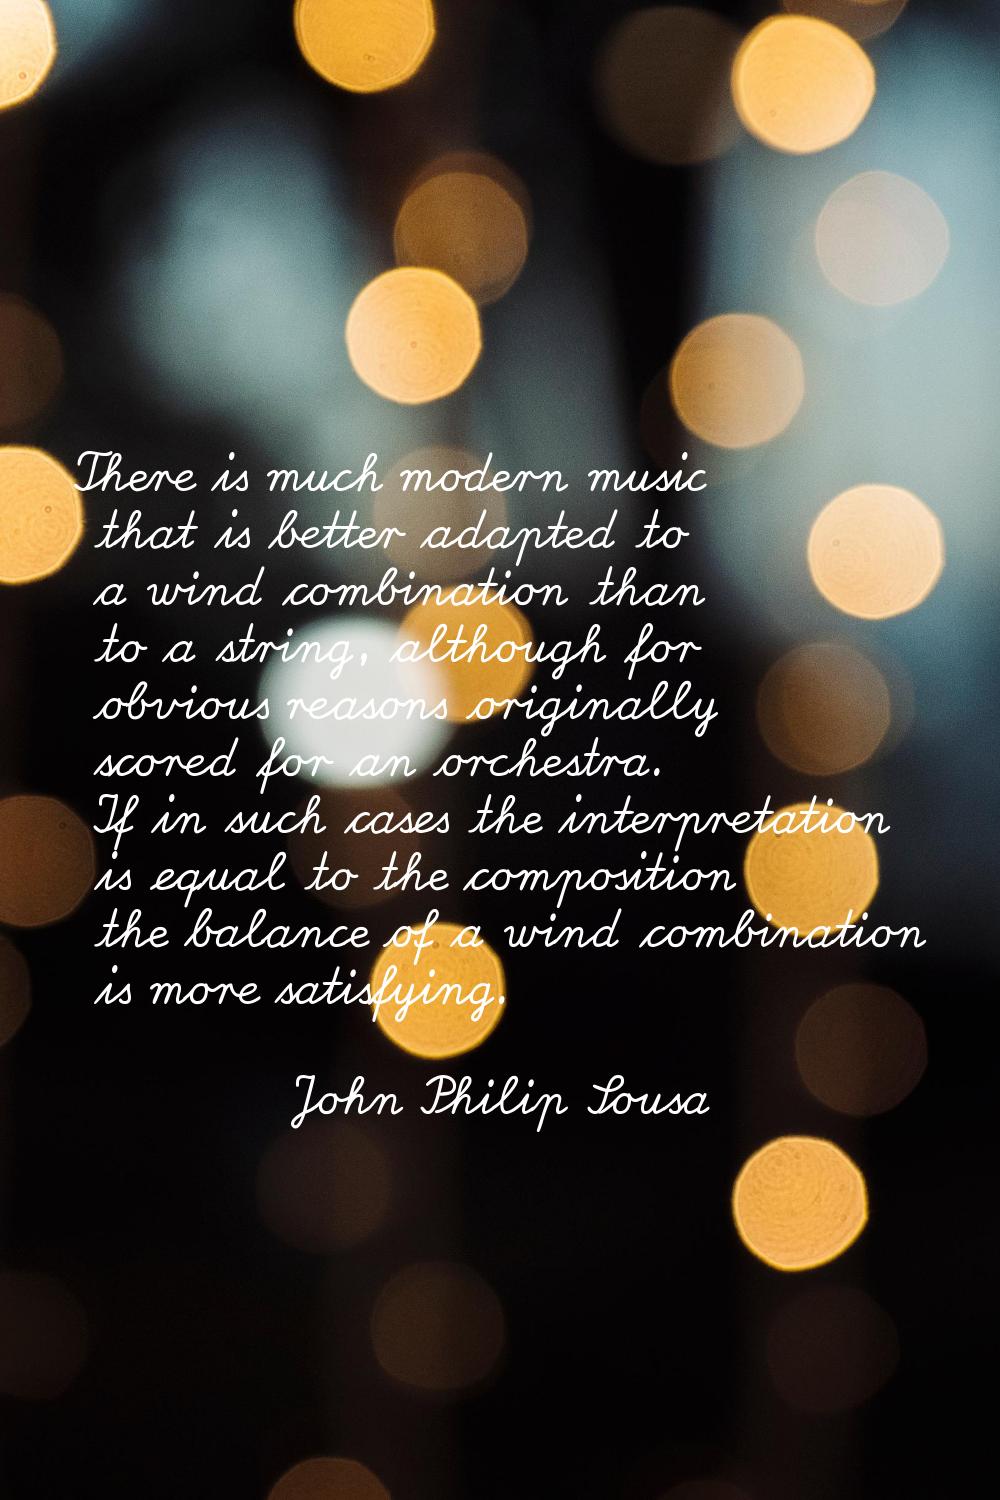 There is much modern music that is better adapted to a wind combination than to a string, although 